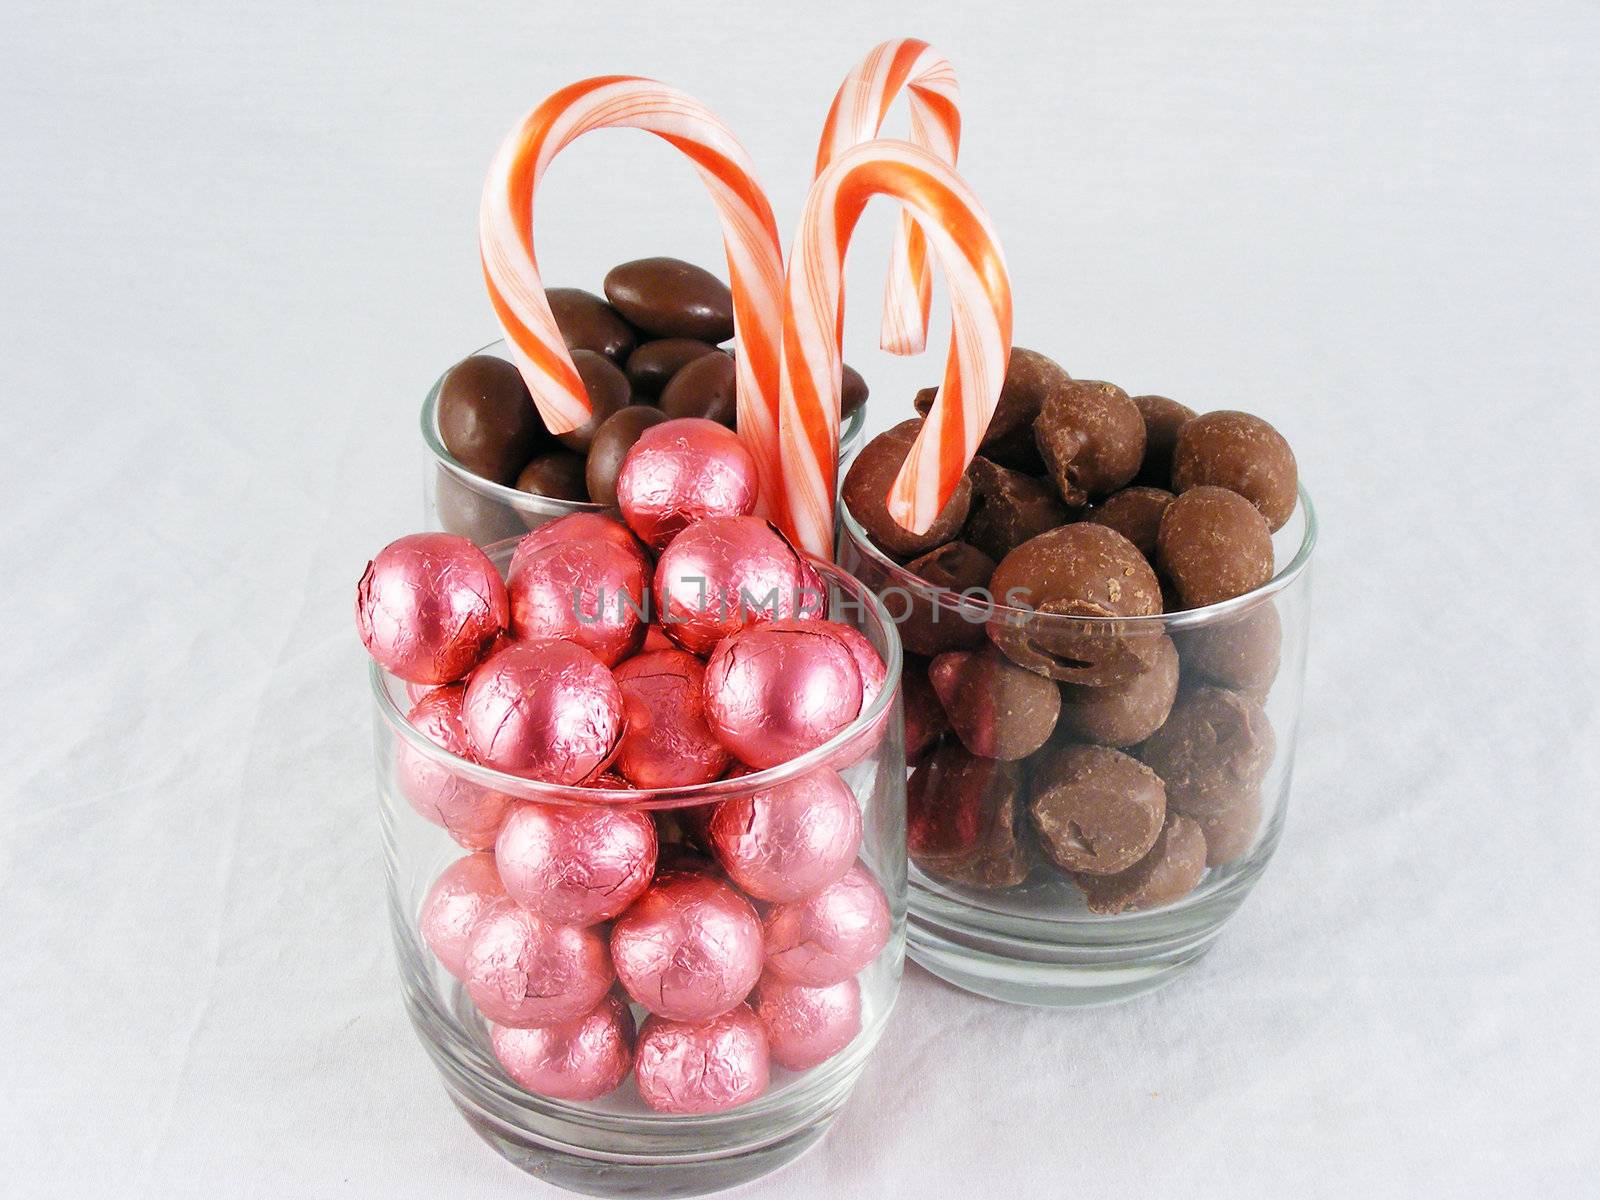 Chocolate covered almonds and peanuts, foil wrapped chocolate, and candy canes.